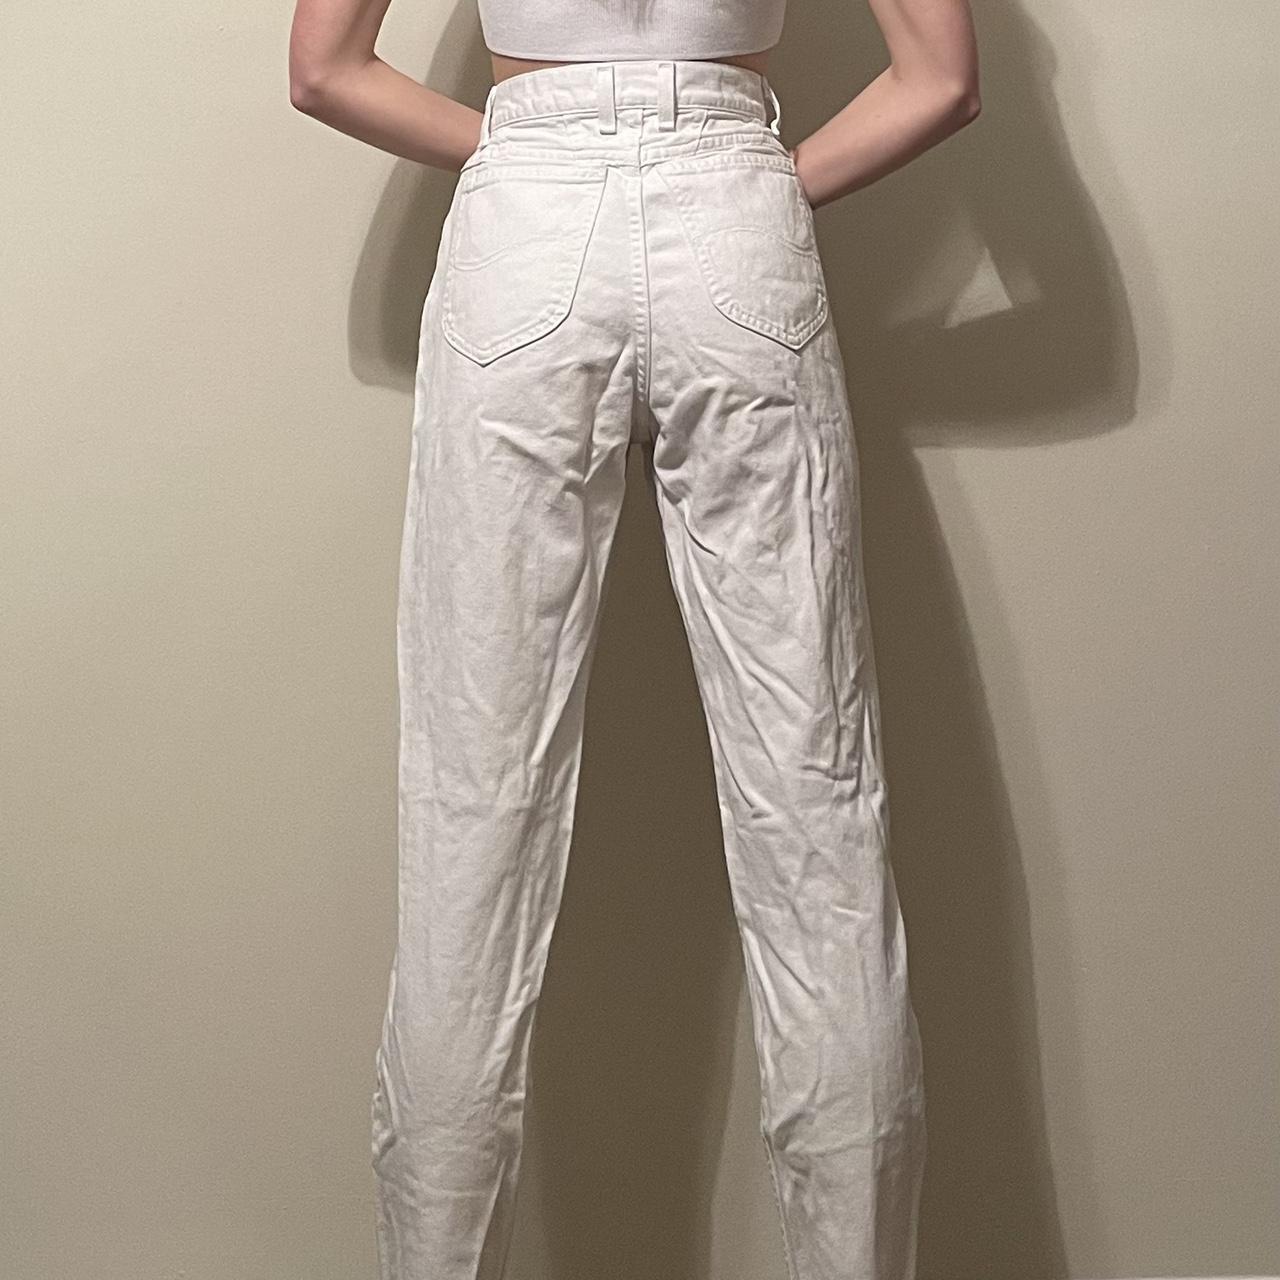 These flattering Lee pants are on sale at